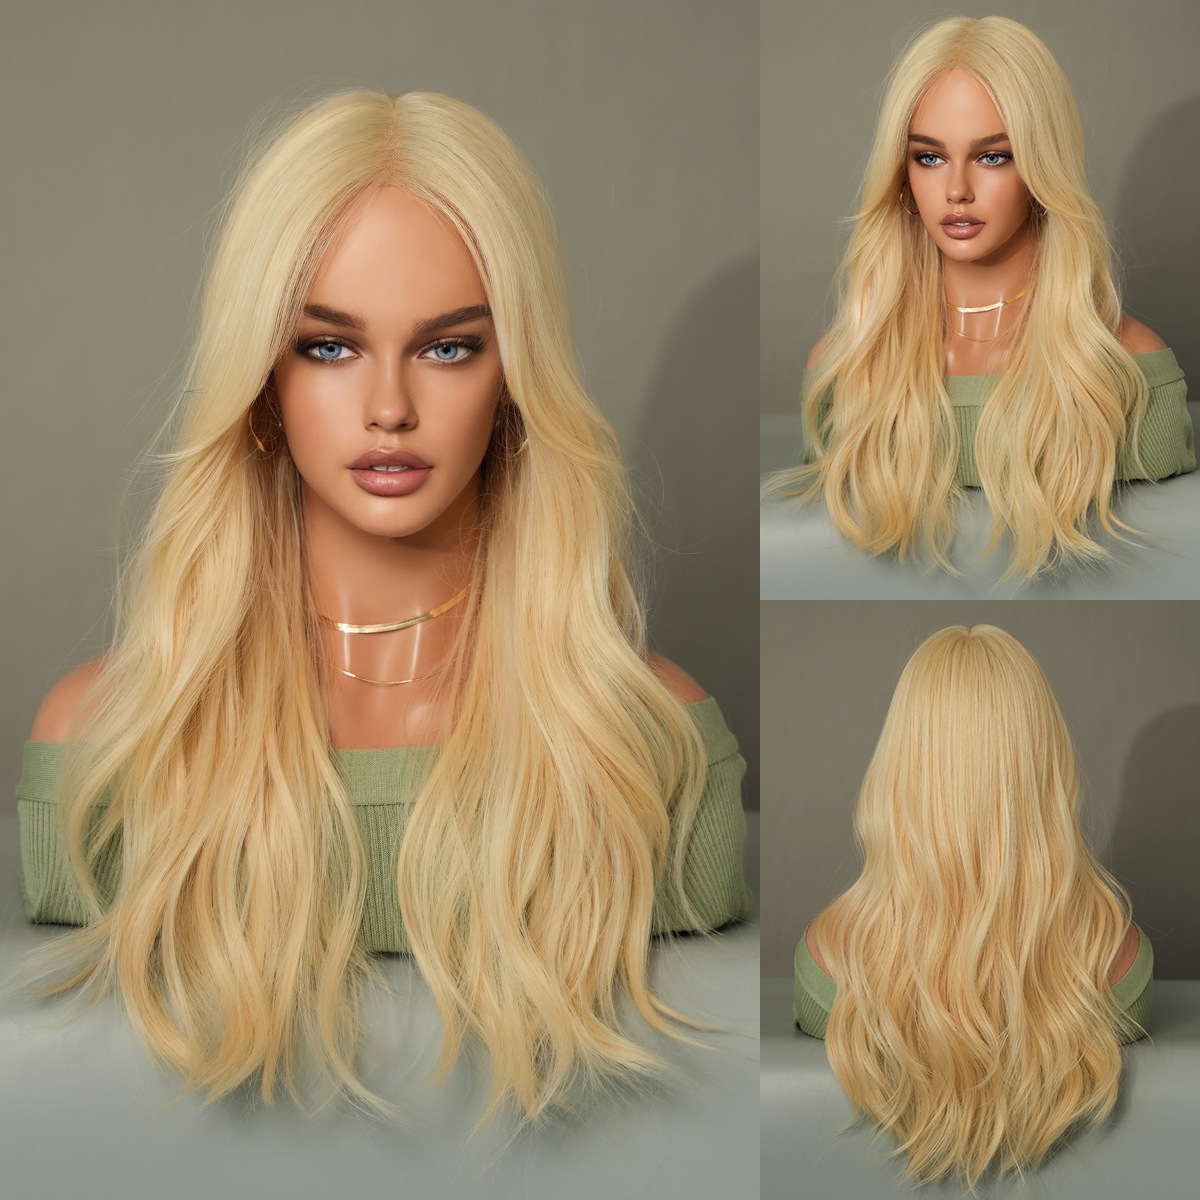 A handwoven synthetic lace wig for women, featuring a medium parted style and light blonde color.